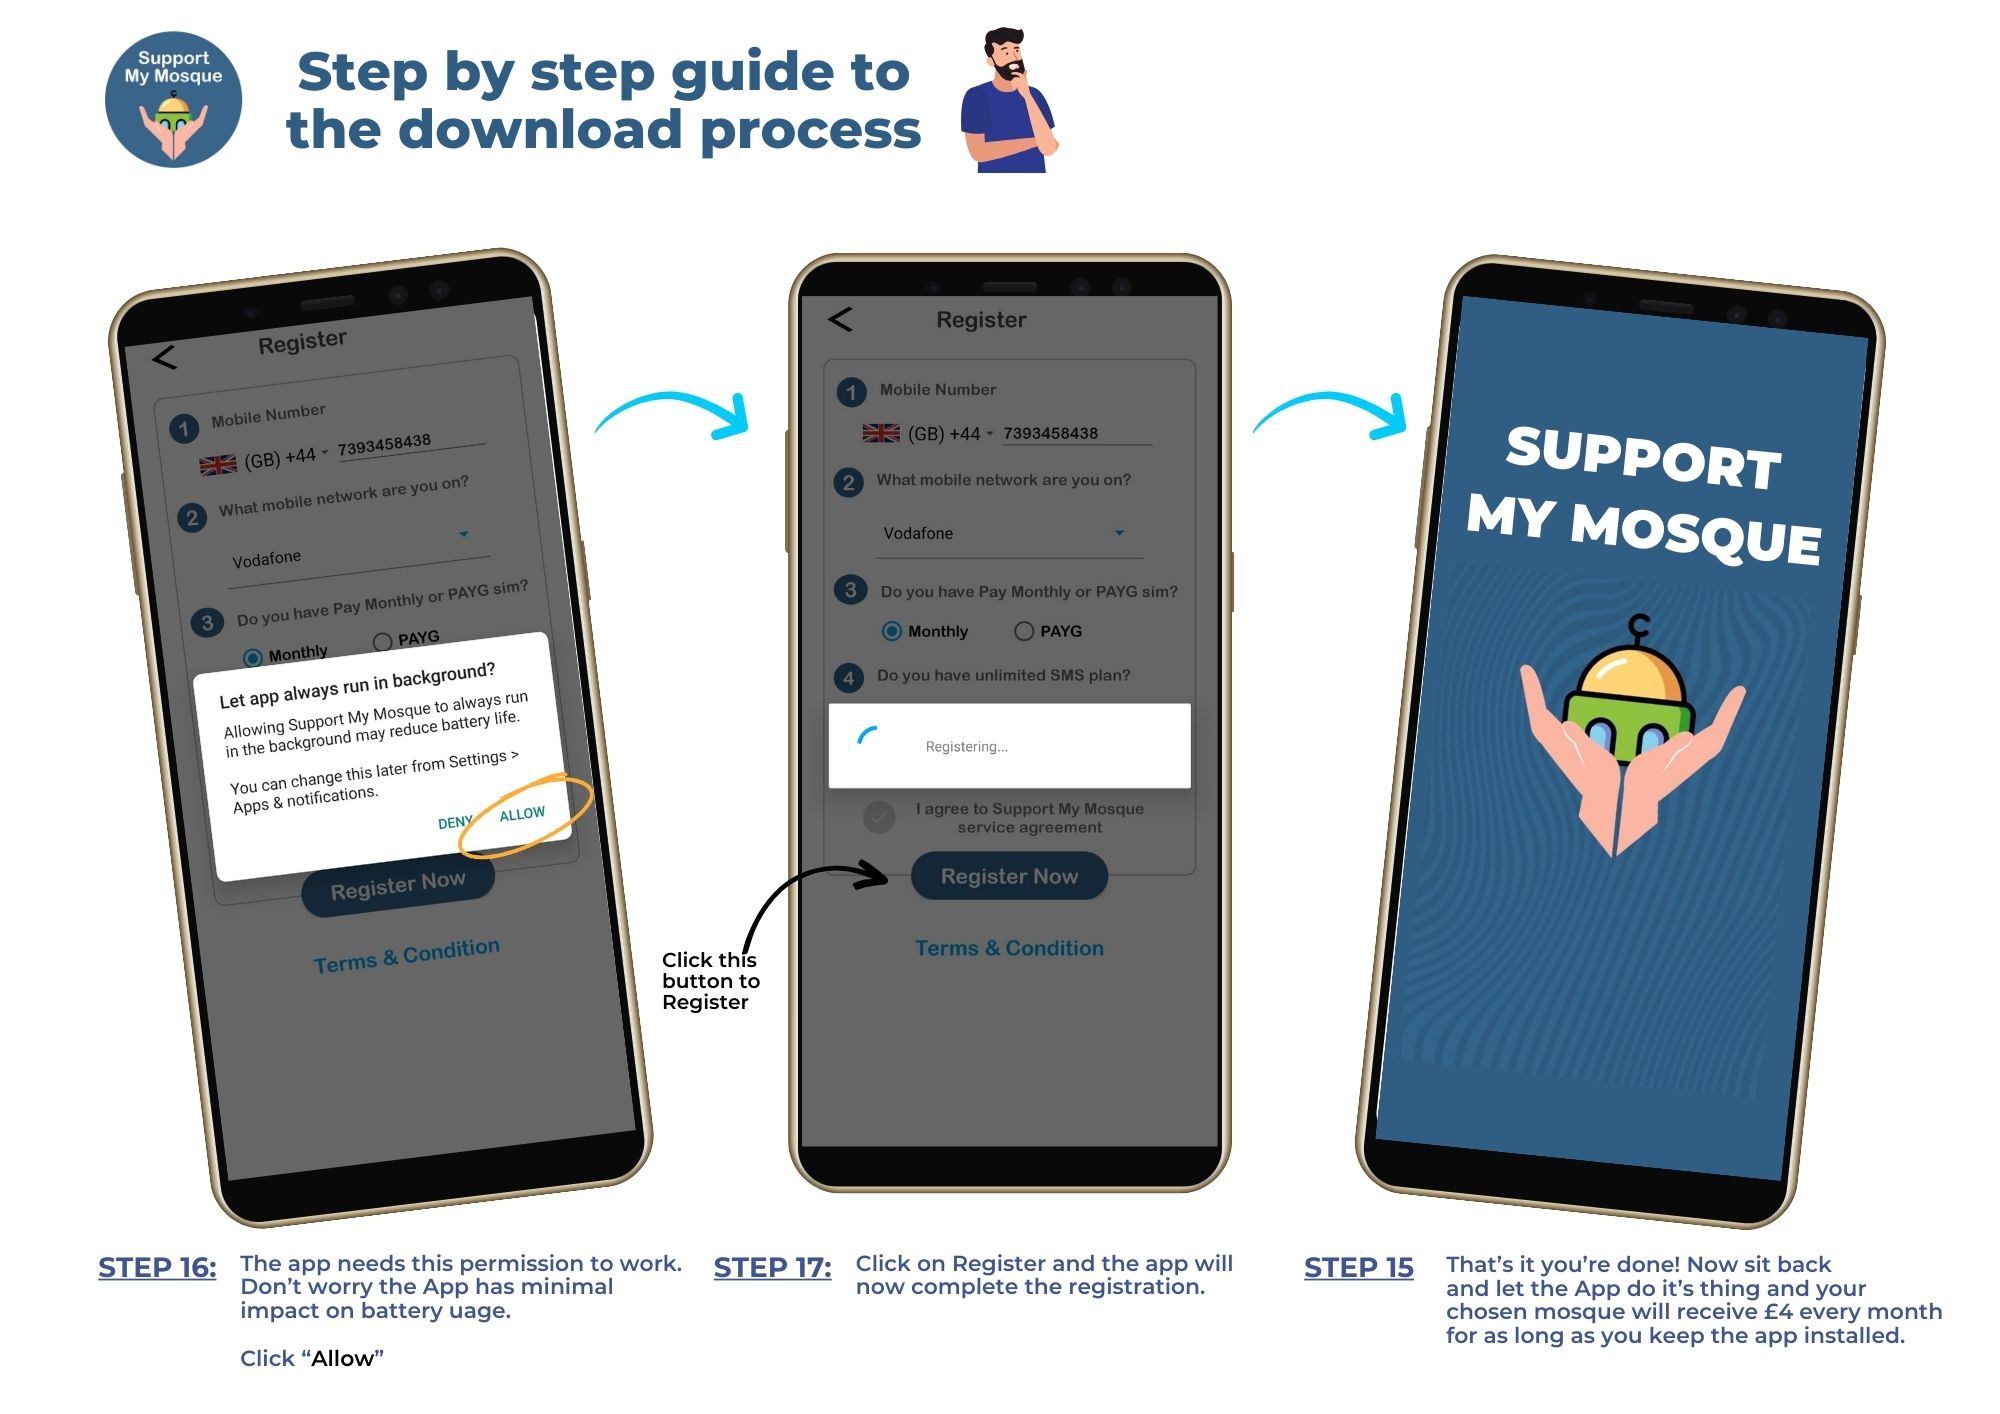 Step by Step Guide to the App download process